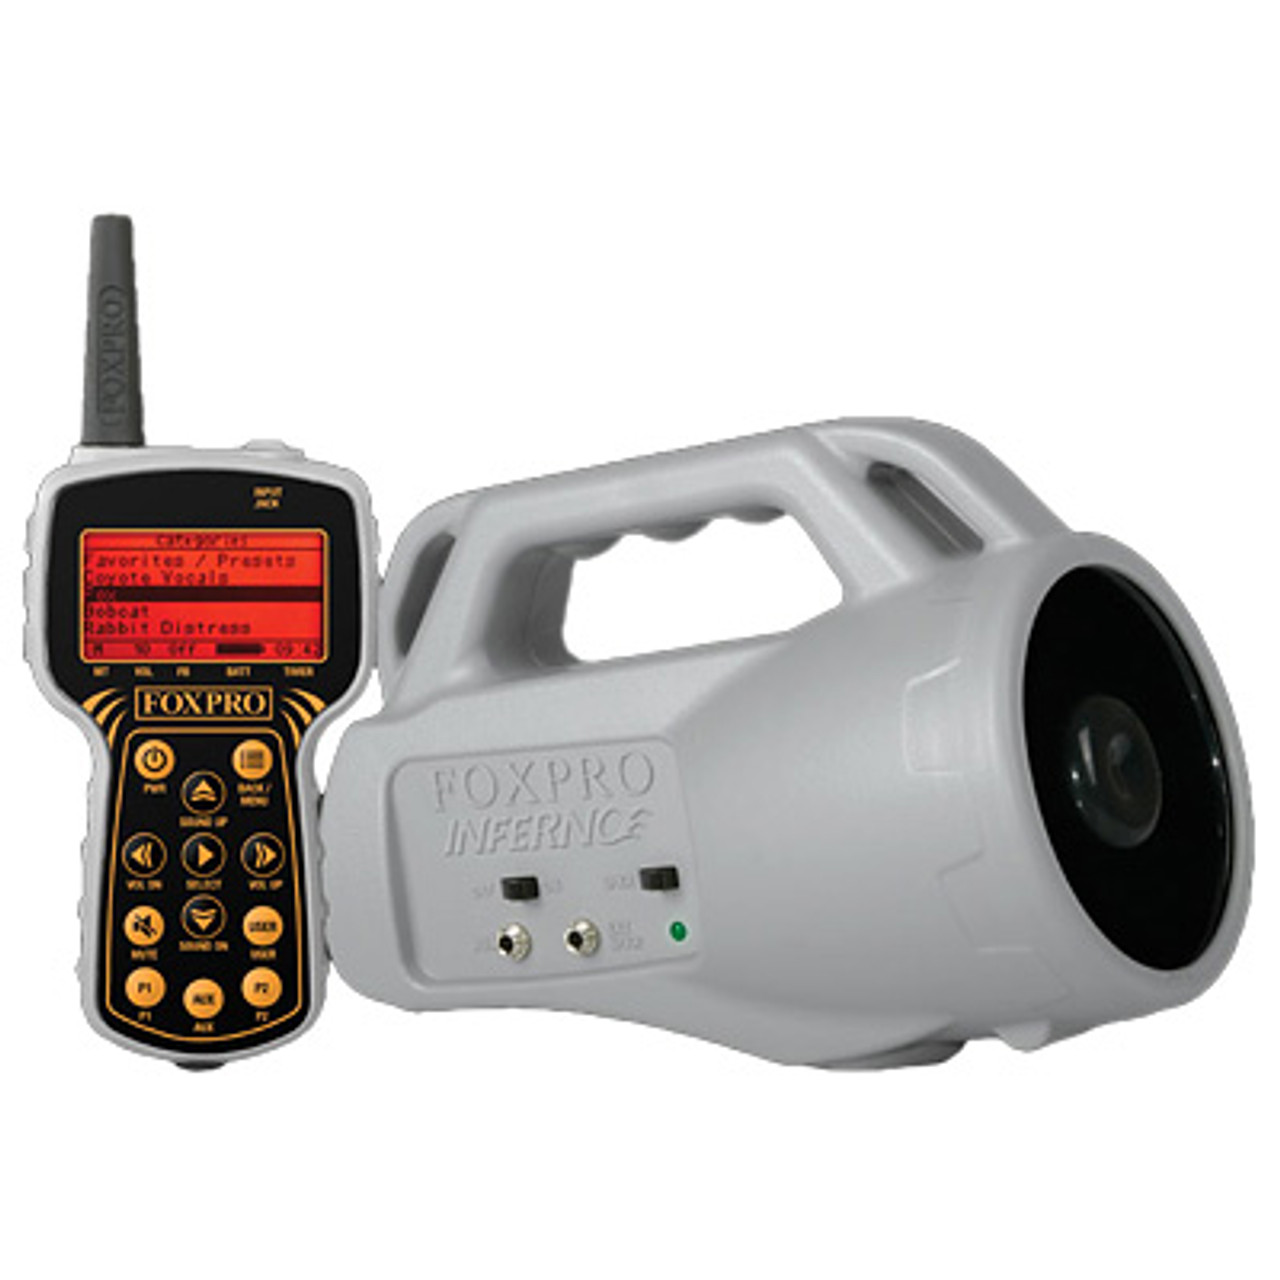 Inferno Portable Digital Call by FoxPro